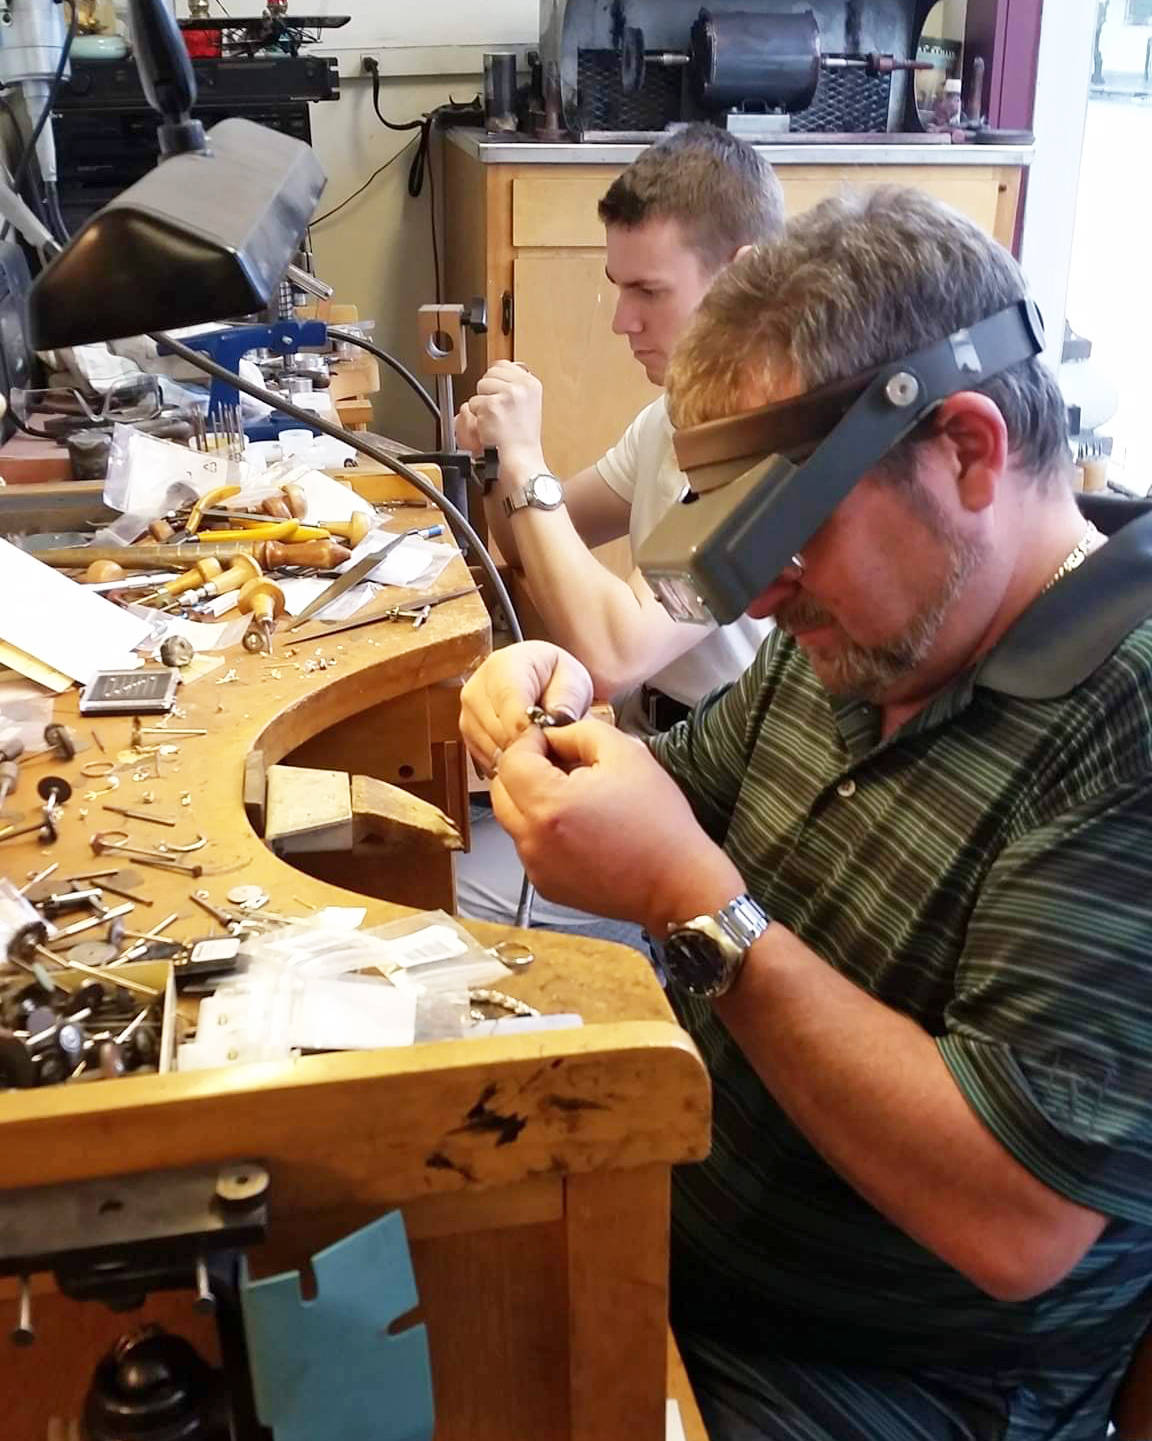 Mike Giron and son Taylor Parson repair watches and jewelry at Wiitamaki Jewelry Store, carrying on the family business started by Giron’s grandparents in 1926.